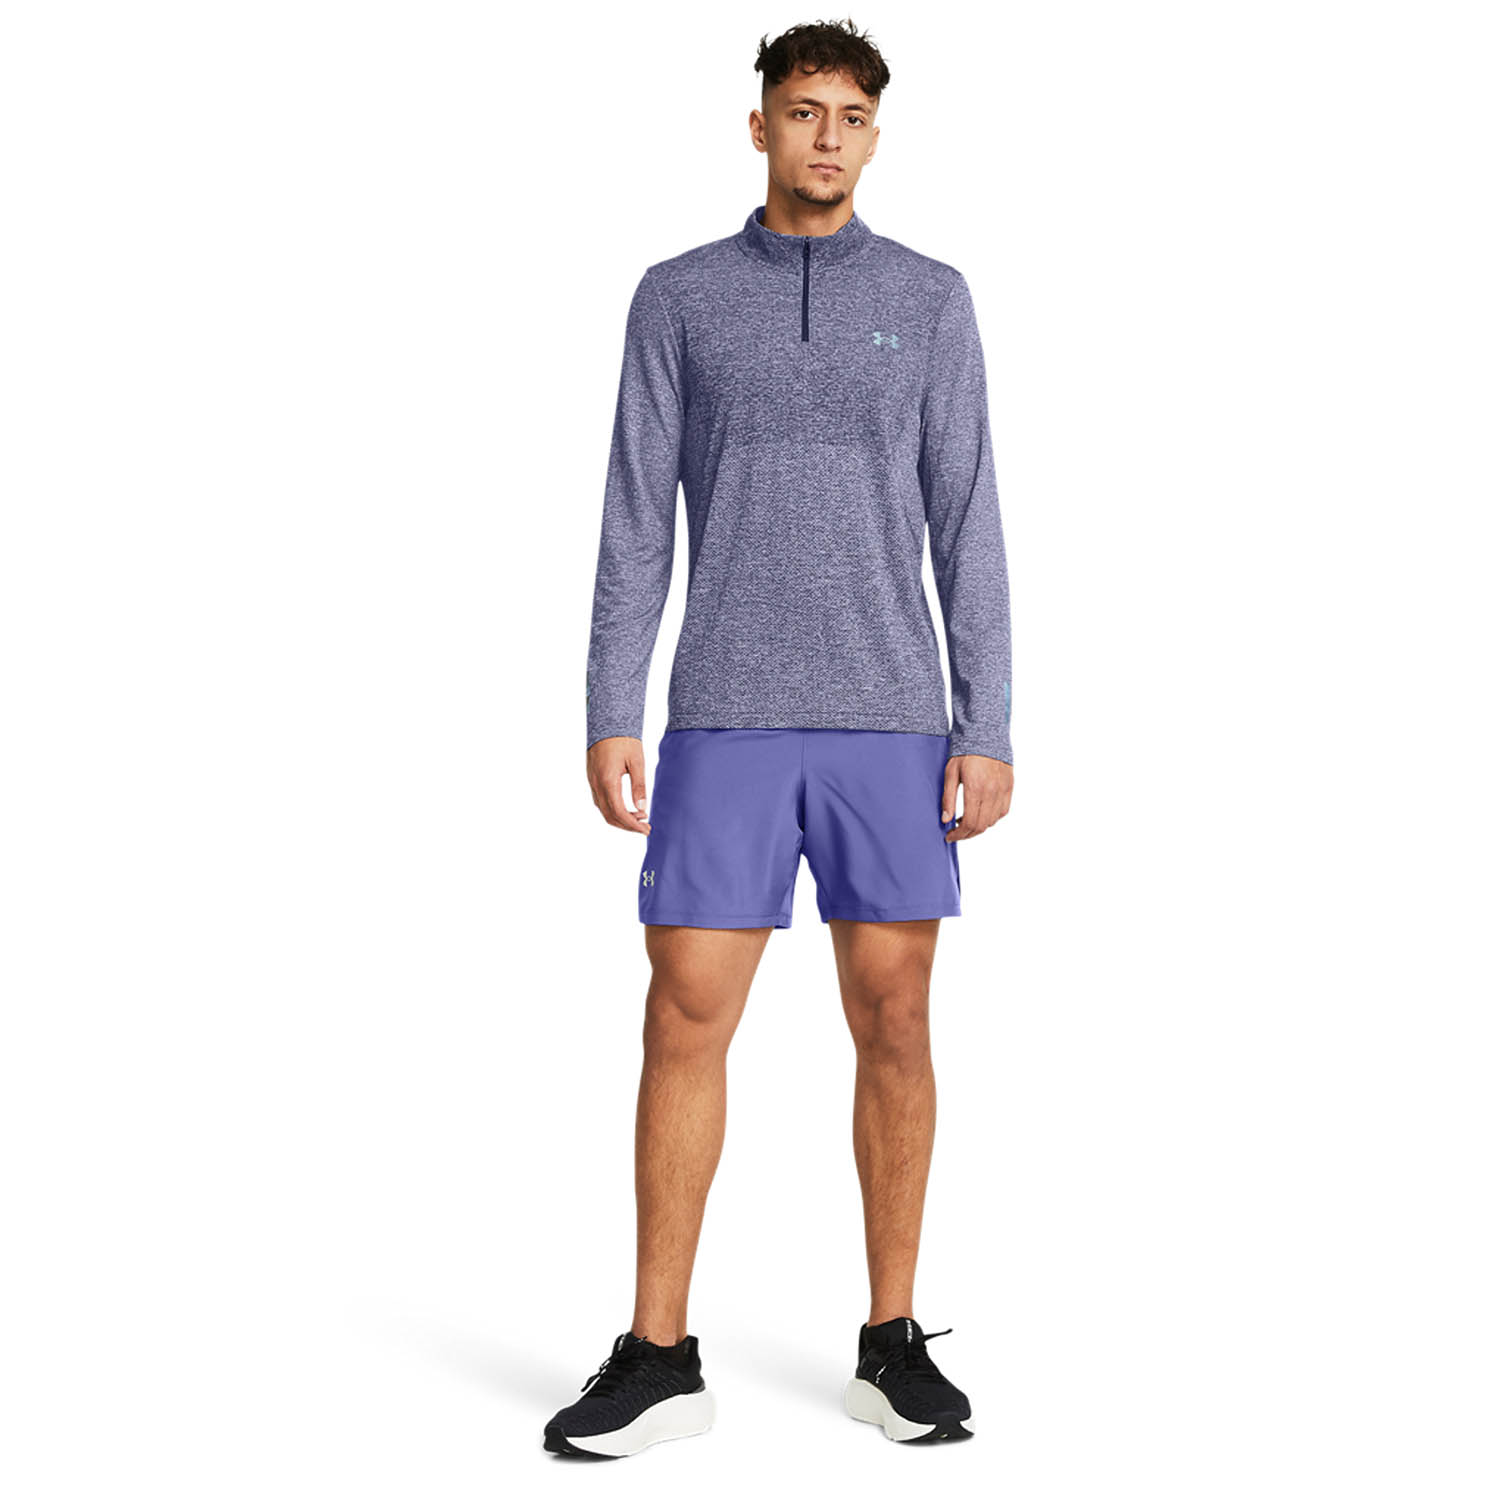 Under Armour Launch 7in Shorts - Starlight/Reflective